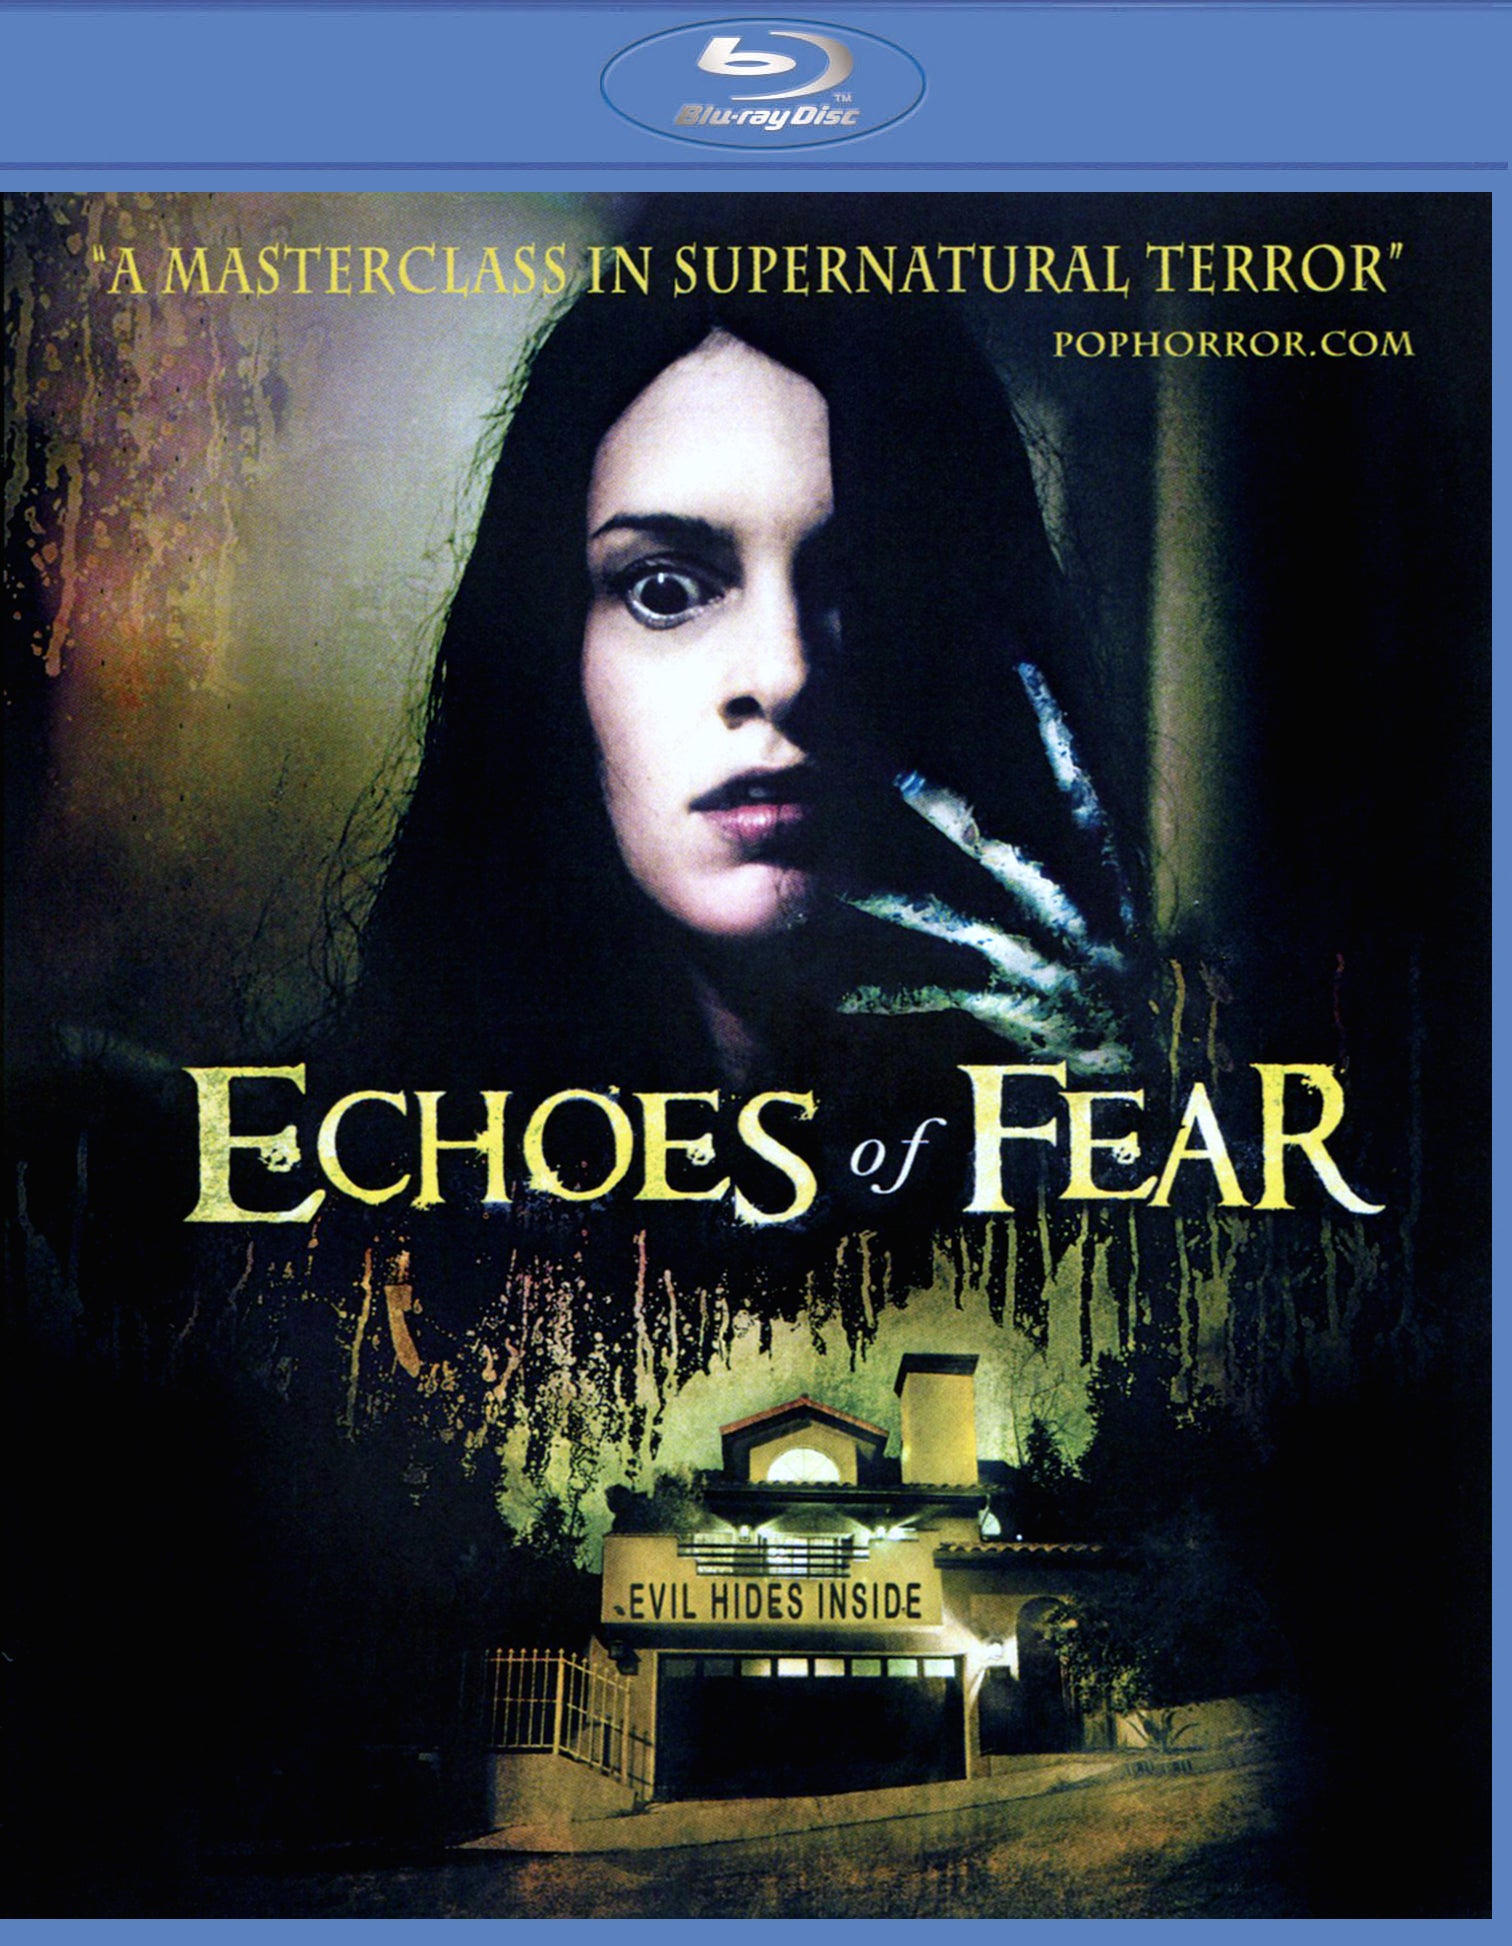 Echoes of Fear [Blu-ray] cover art